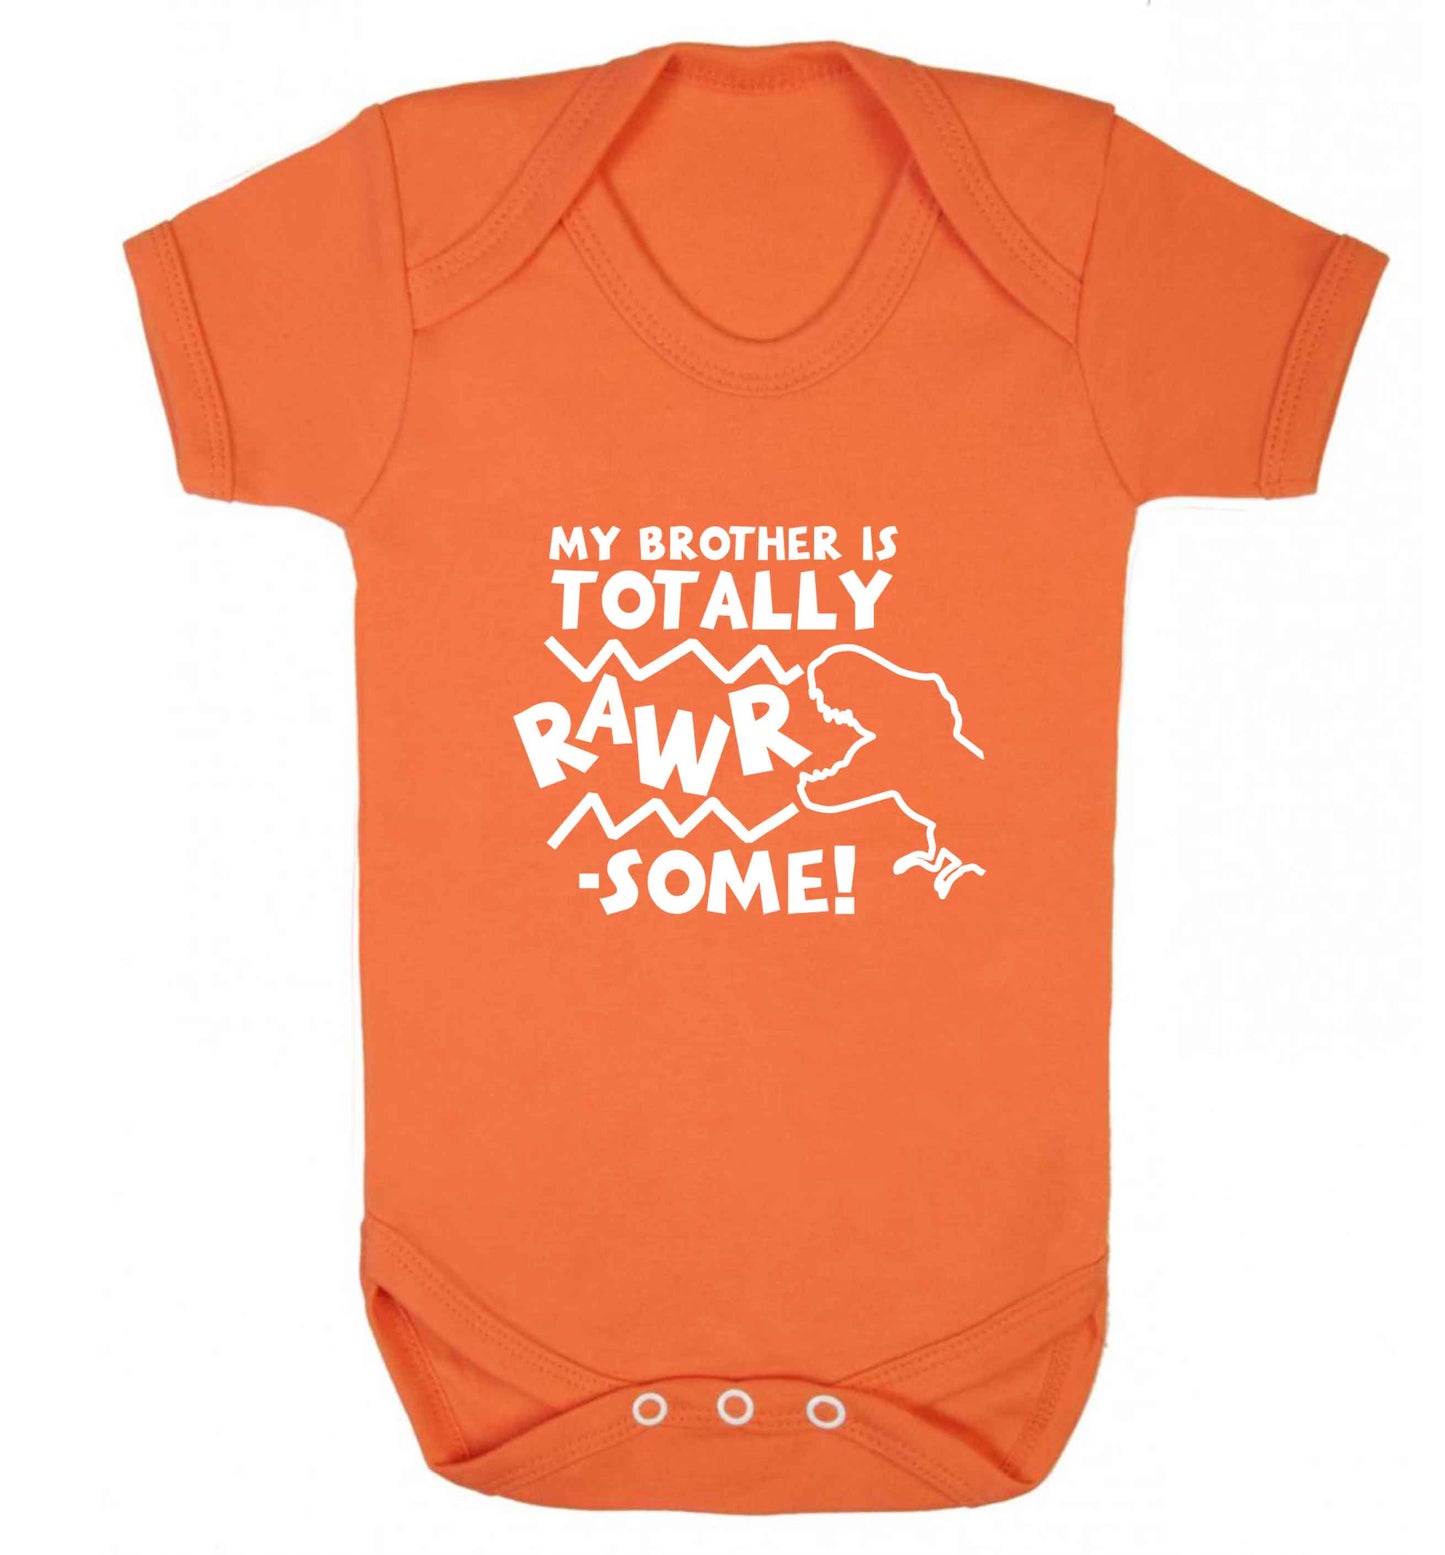 My brother is totally rawrsome baby vest orange 18-24 months